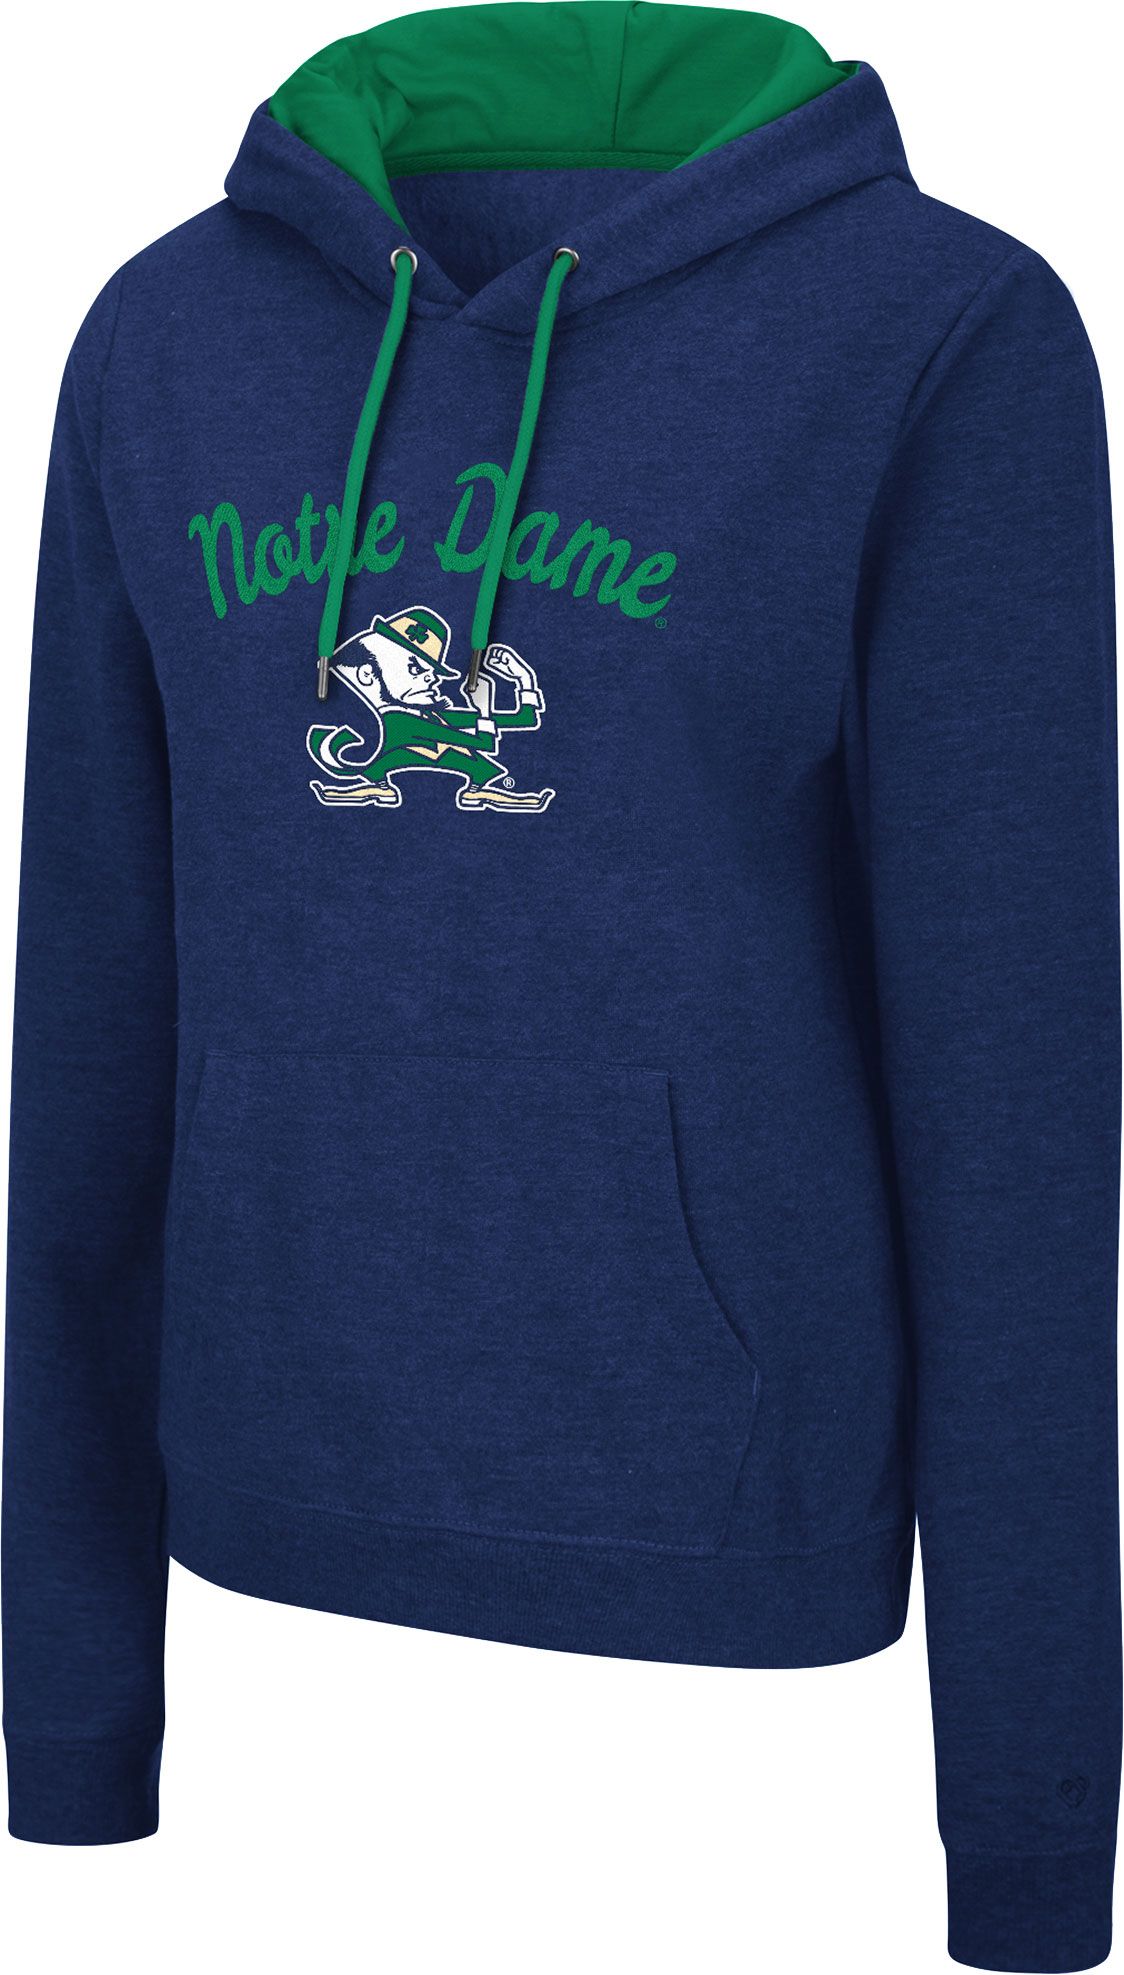 Women S Notre Dame Gear Apparel Curbside Pickup Available At Dick S